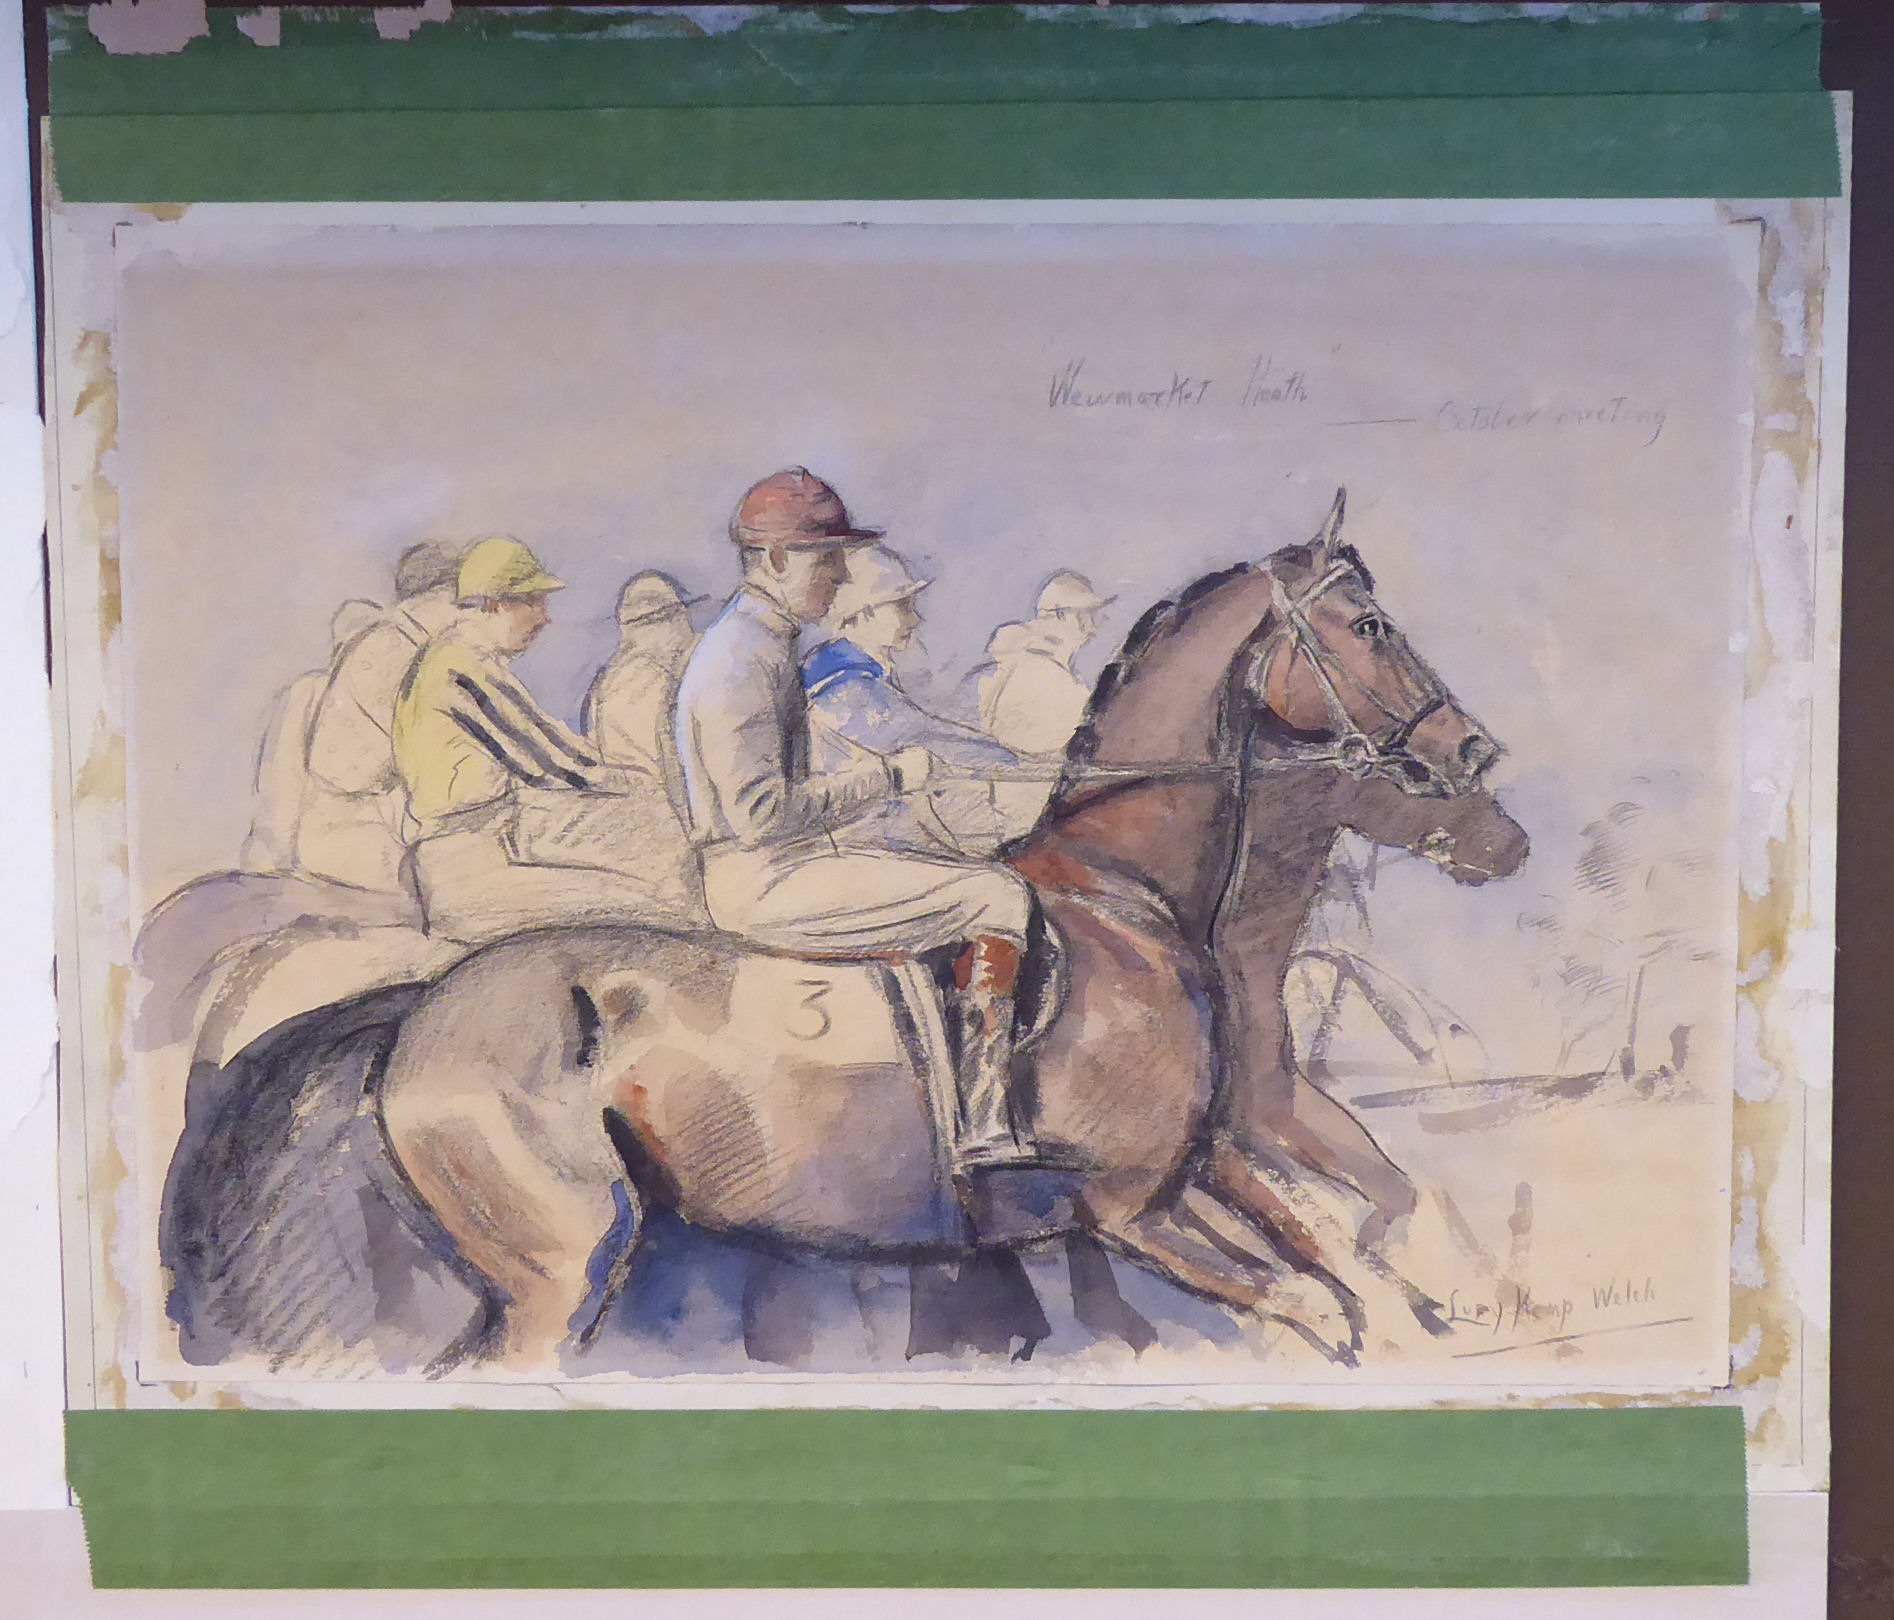 Lucy Kemp Welch - 'Newmarket Heath October Meeting' pencil & watercolour bears an inscription & - Image 11 of 16